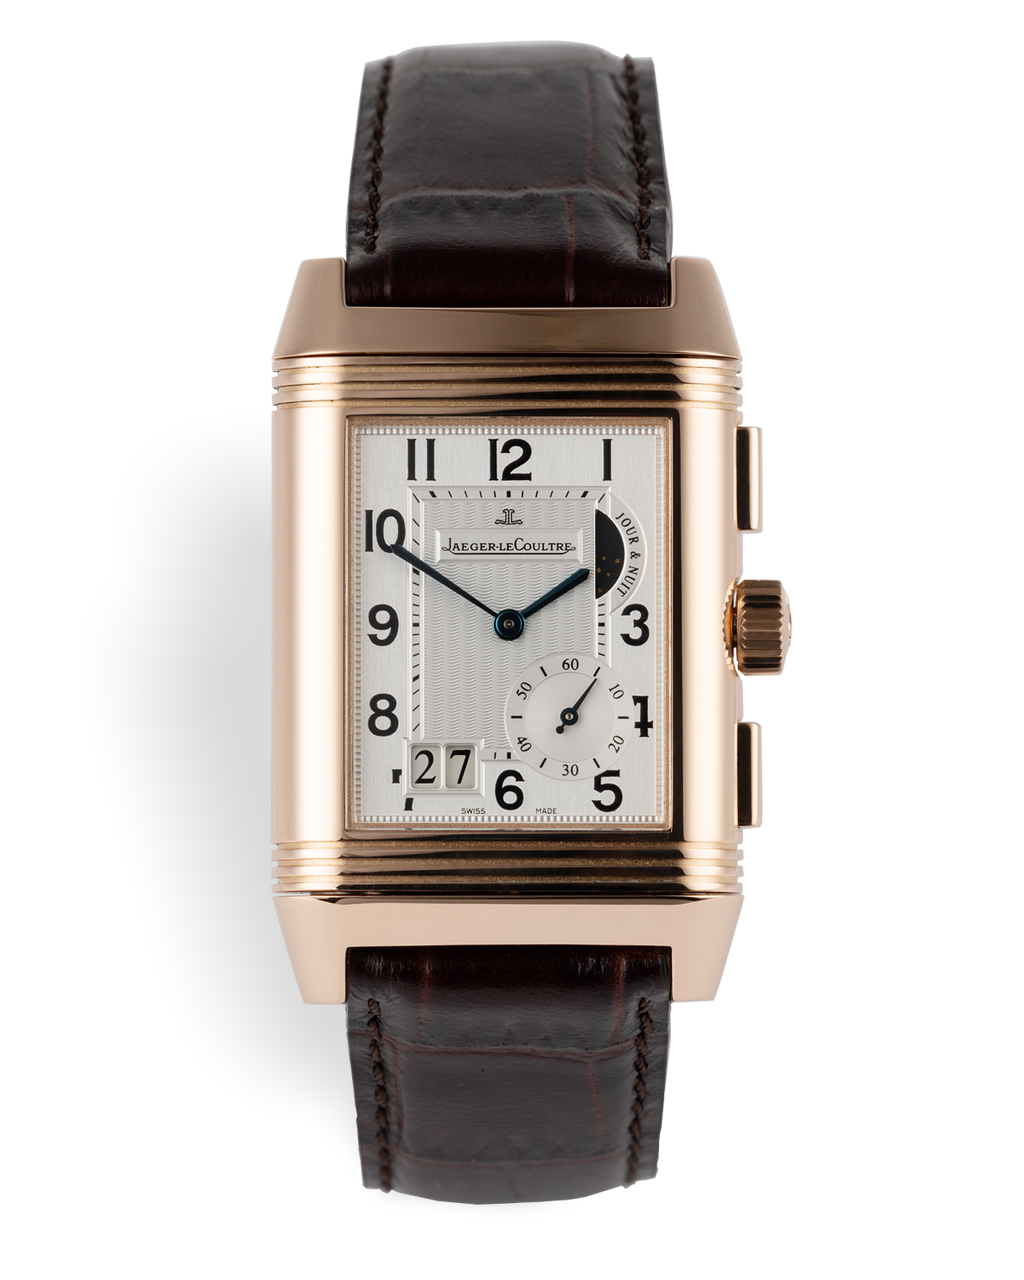 Jaeger-leCoultre Reverso Grande GMT Watches | ref 240.2.18 | Rose Gold ...